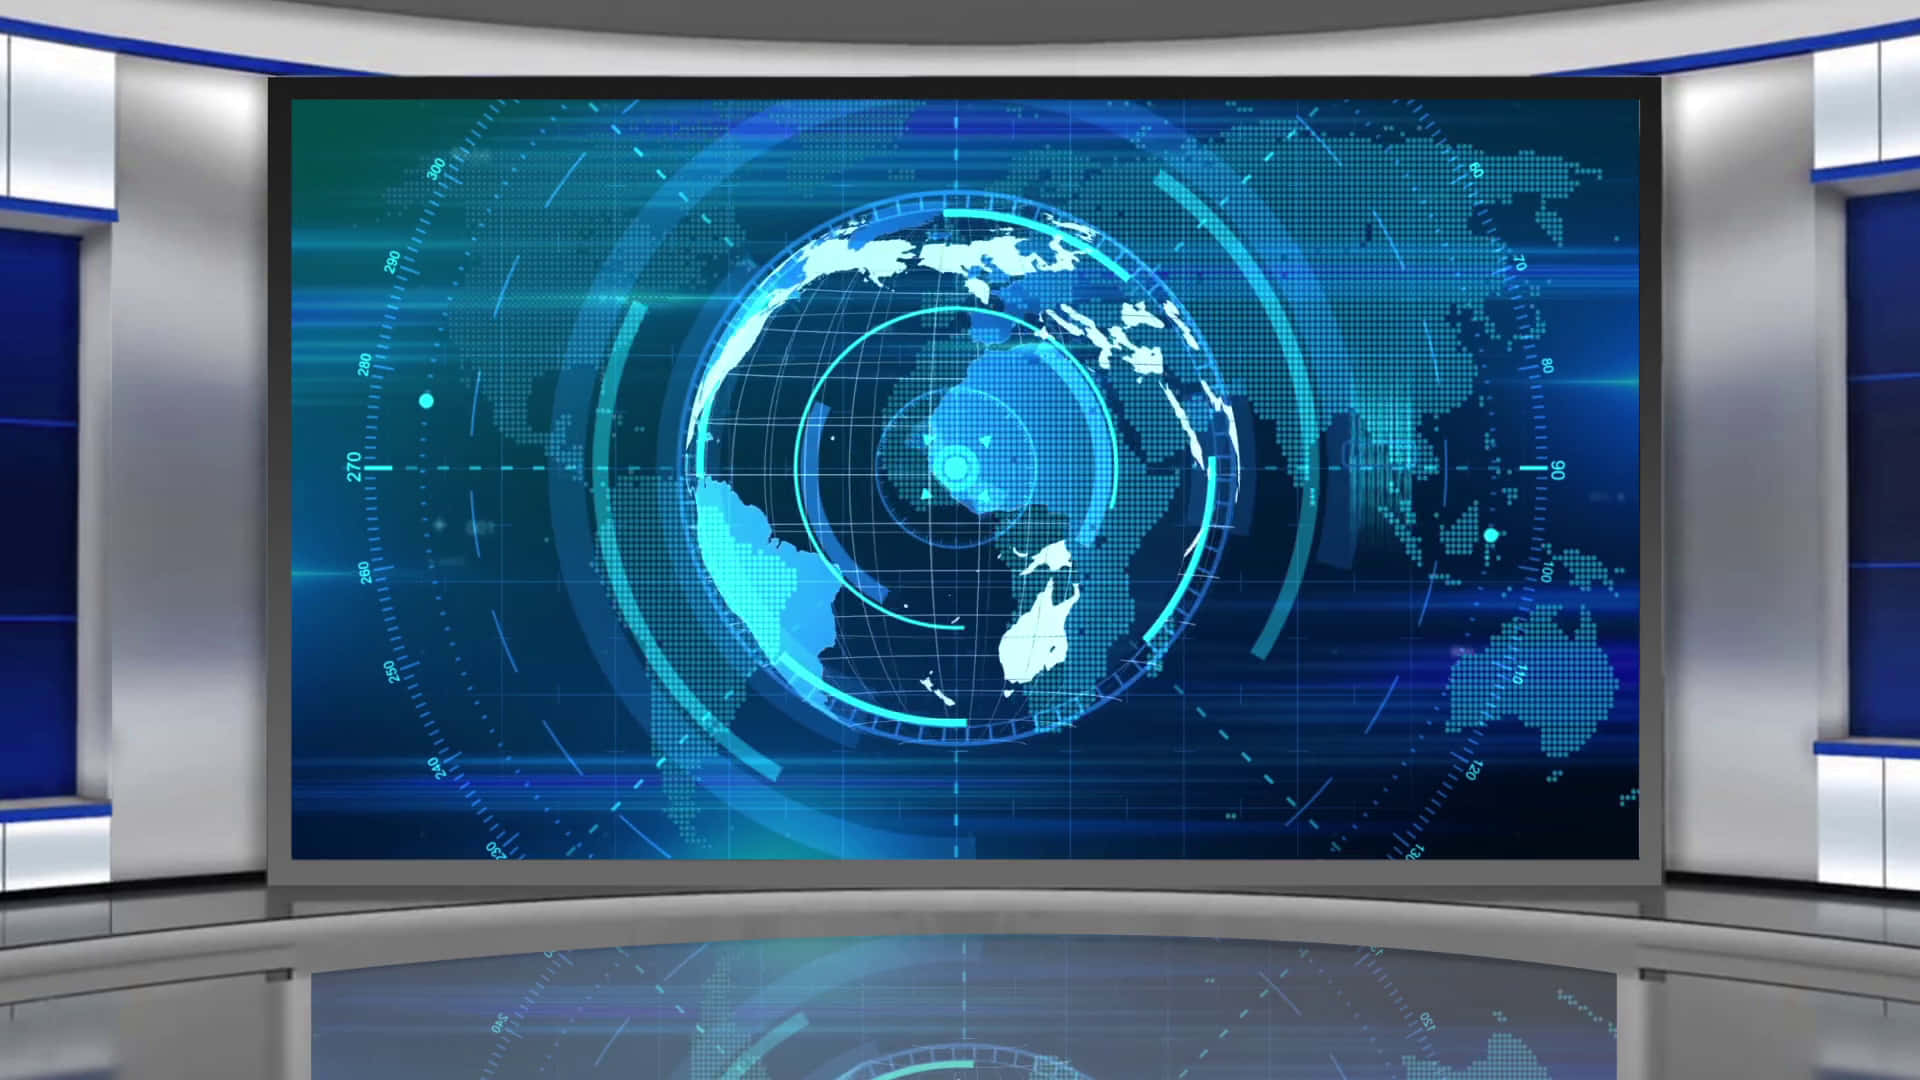 100+] News Studio Background s for FREE 